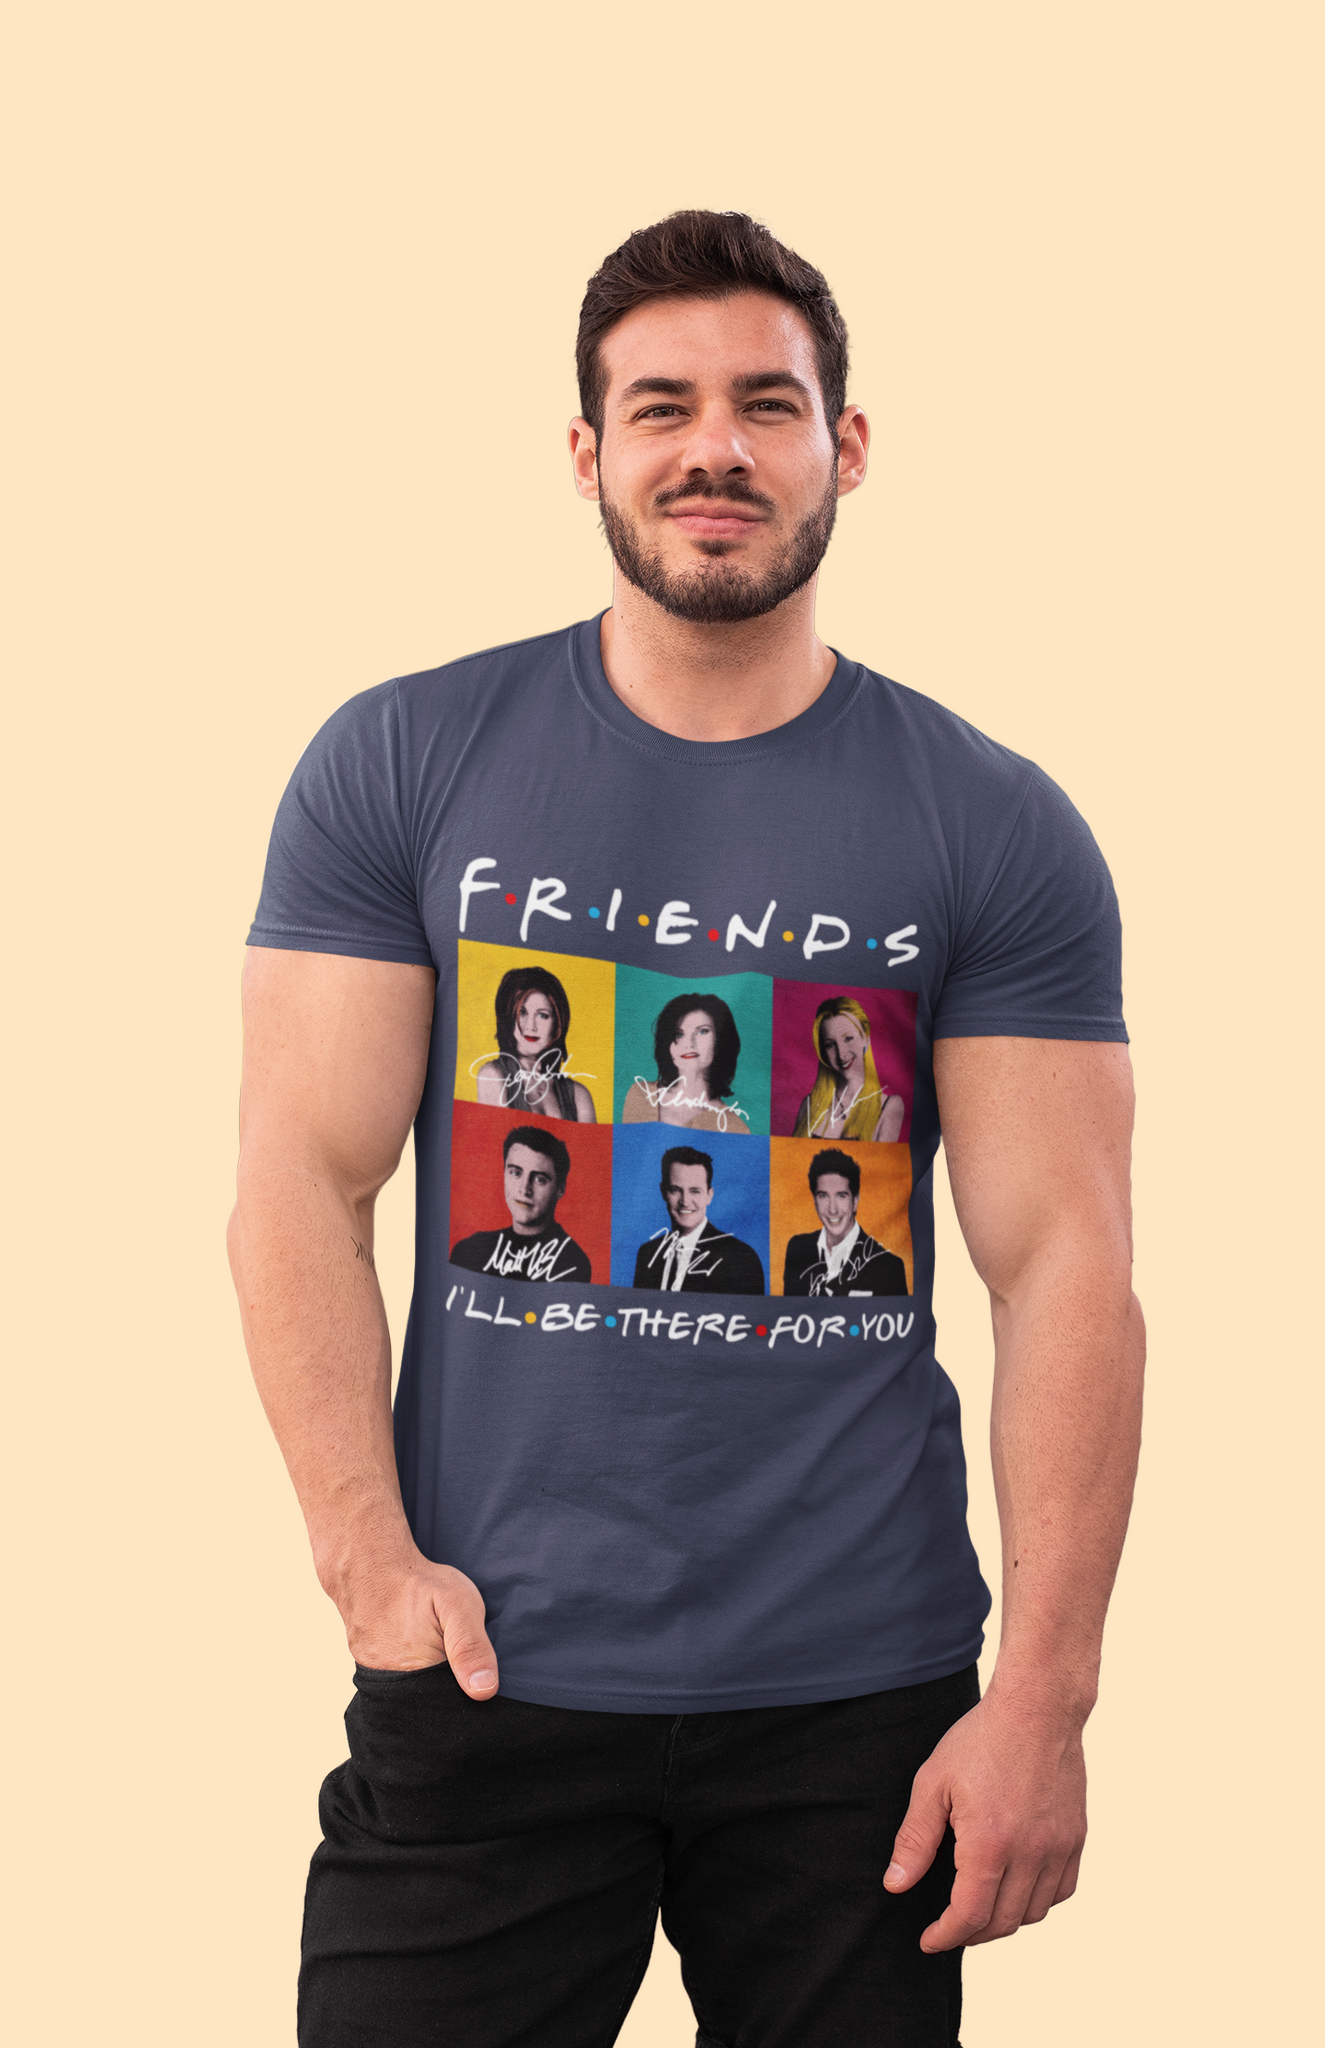 Friends TV Show T Shirt, Friends Characters T Shirt, Ill Be There For You Tshirt